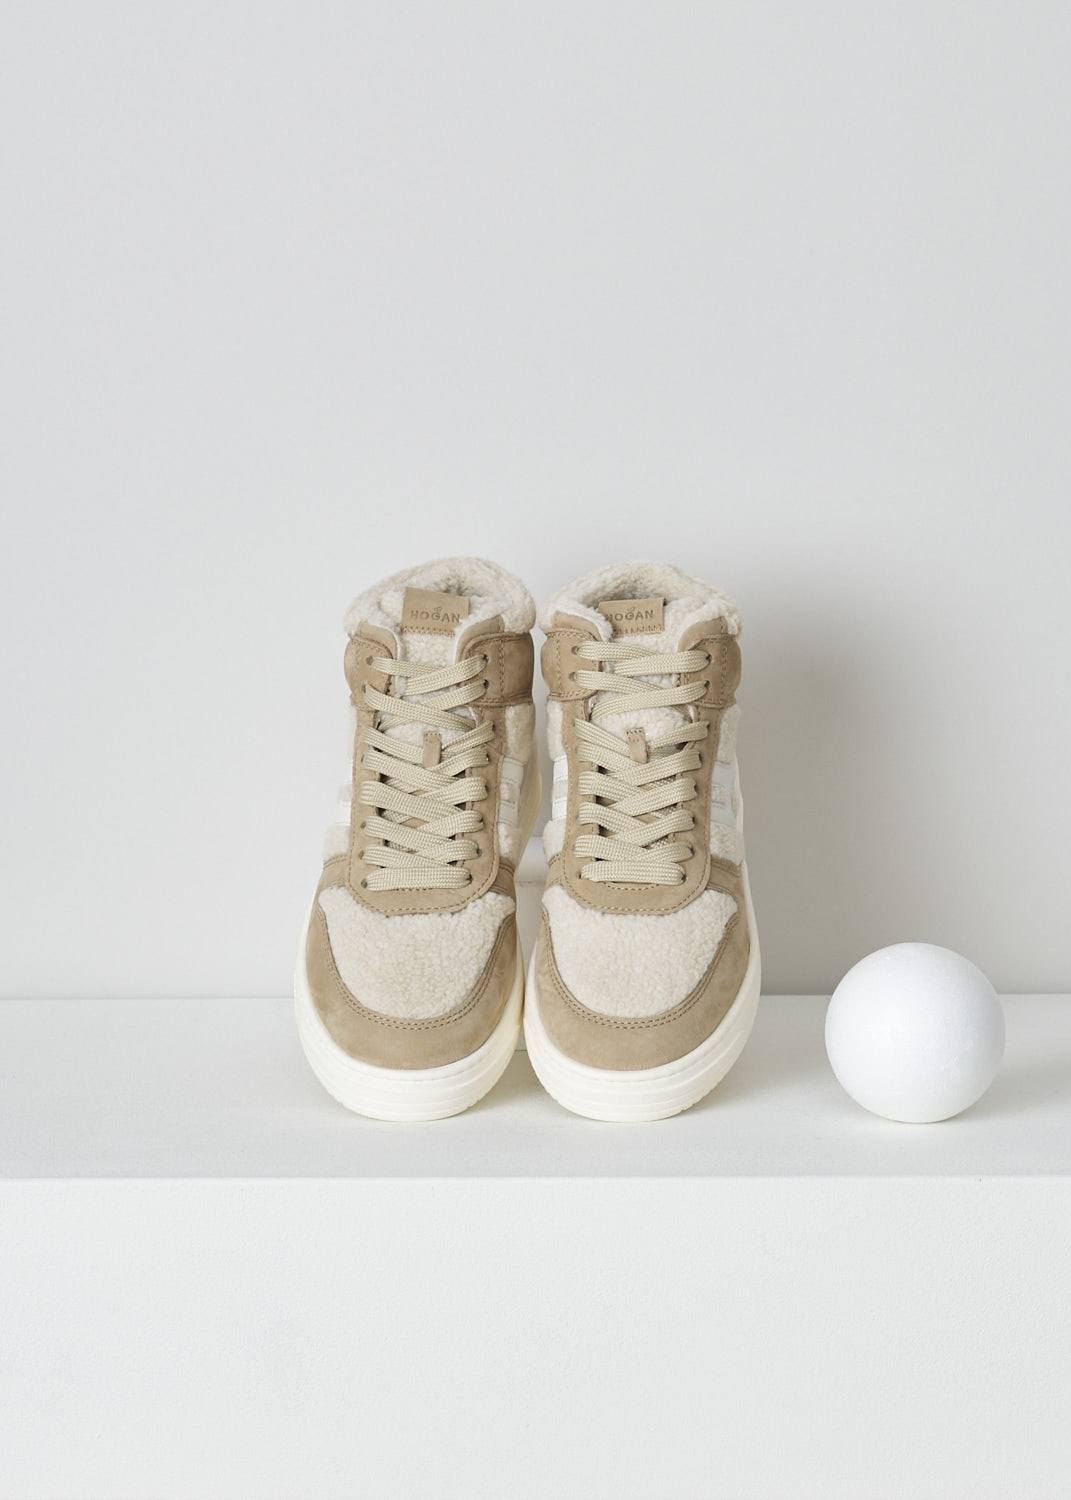 HOGAN, BEIGE TEDDY H630 BASKET SNEAKERS, GYW6300FE30SQW02S1_SQW, Beige, Top, These beige H630 Basket sneakers feature a front lace-up fastening with beige laces. On the tongue, a  brown leather tab has the brand's logo embossed on it. The sneaker consist of brown suede and white teddy fabric. On the side, the brand's H logo has been incorporated in the design in white leather.  These sneakers have a thick white sole. They come with an additional pair of laces in brown.   
